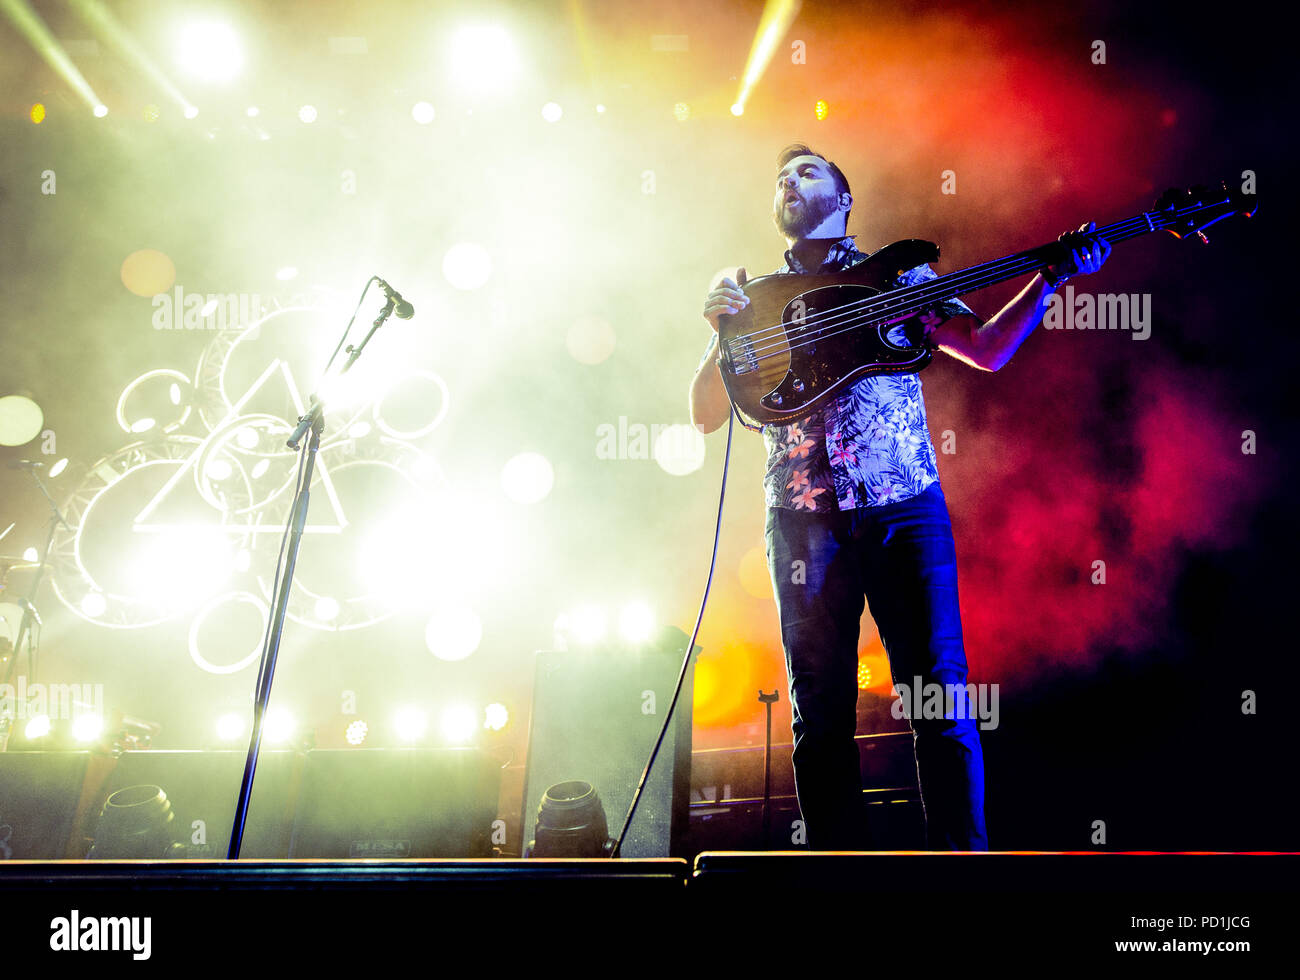 Austin, Texas, USA. 3rd Aug, 2018. ZACH COOPER, bassist of Coheed and Cambria, performs at the Austin360 Amphitheater in Austin, TX. Credit: Alicia Armijo/ZUMA Wire/Alamy Live News Stock Photo